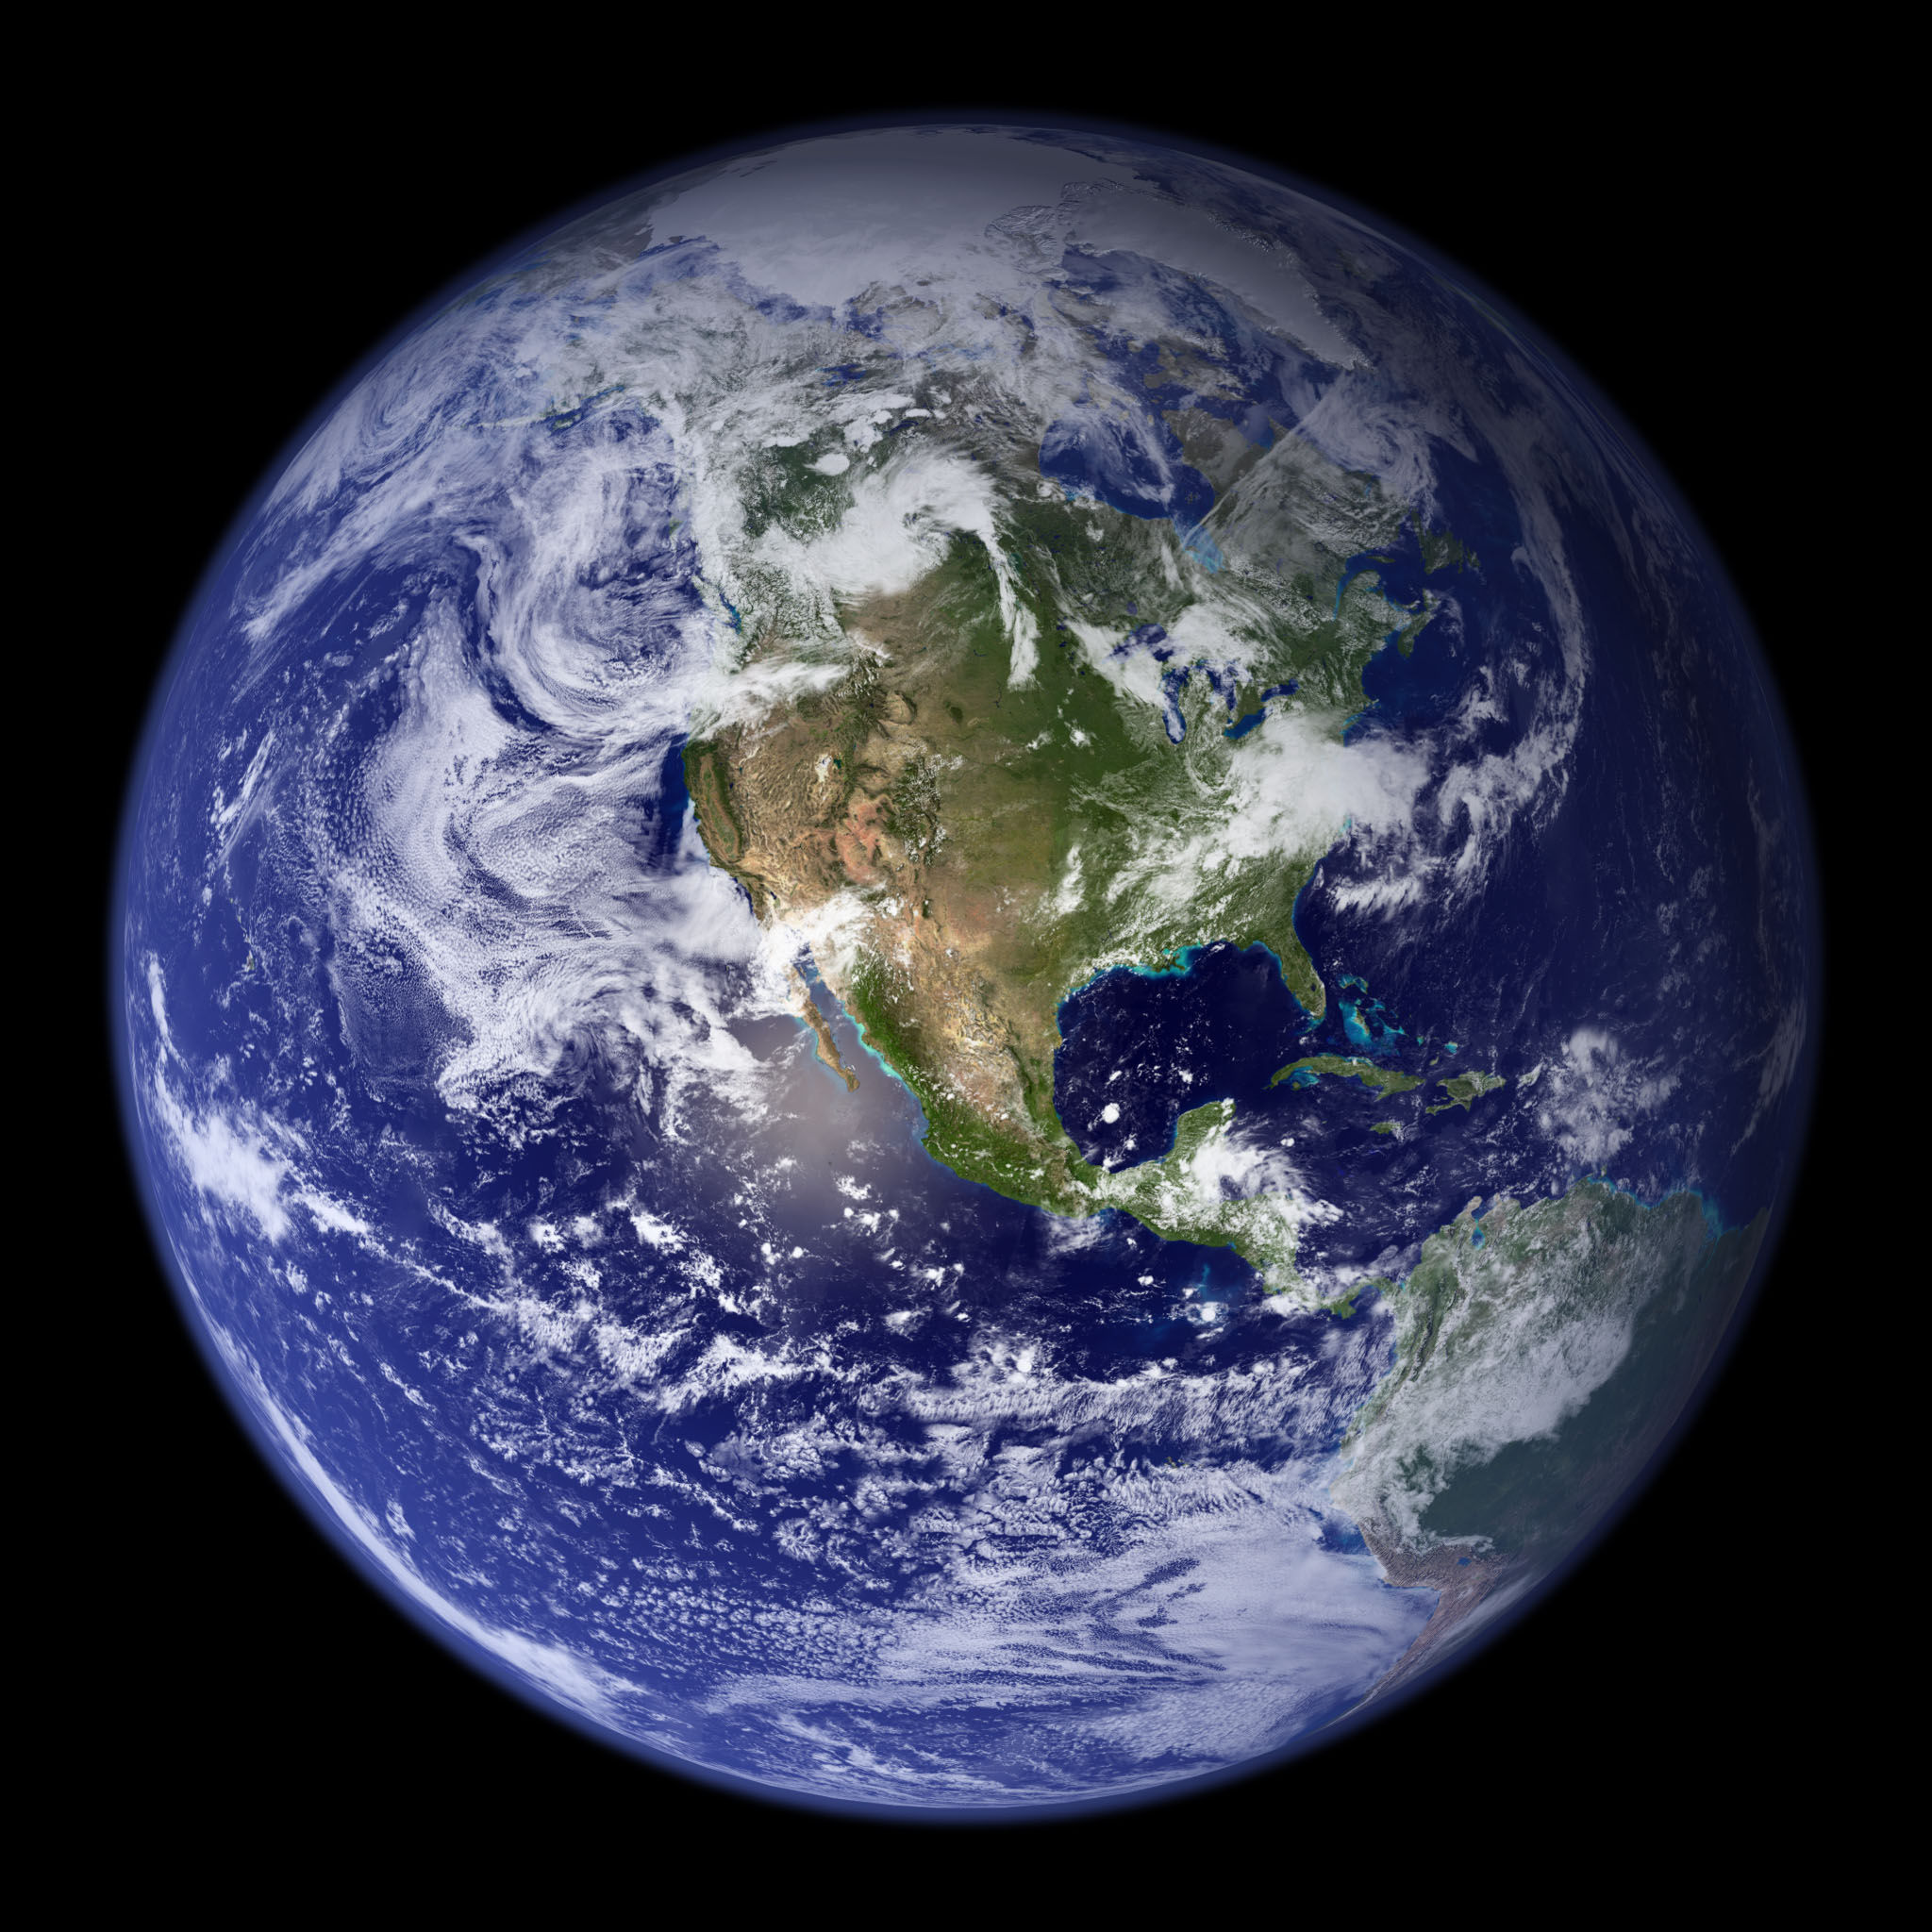 Satellite image of Earth as seen from space